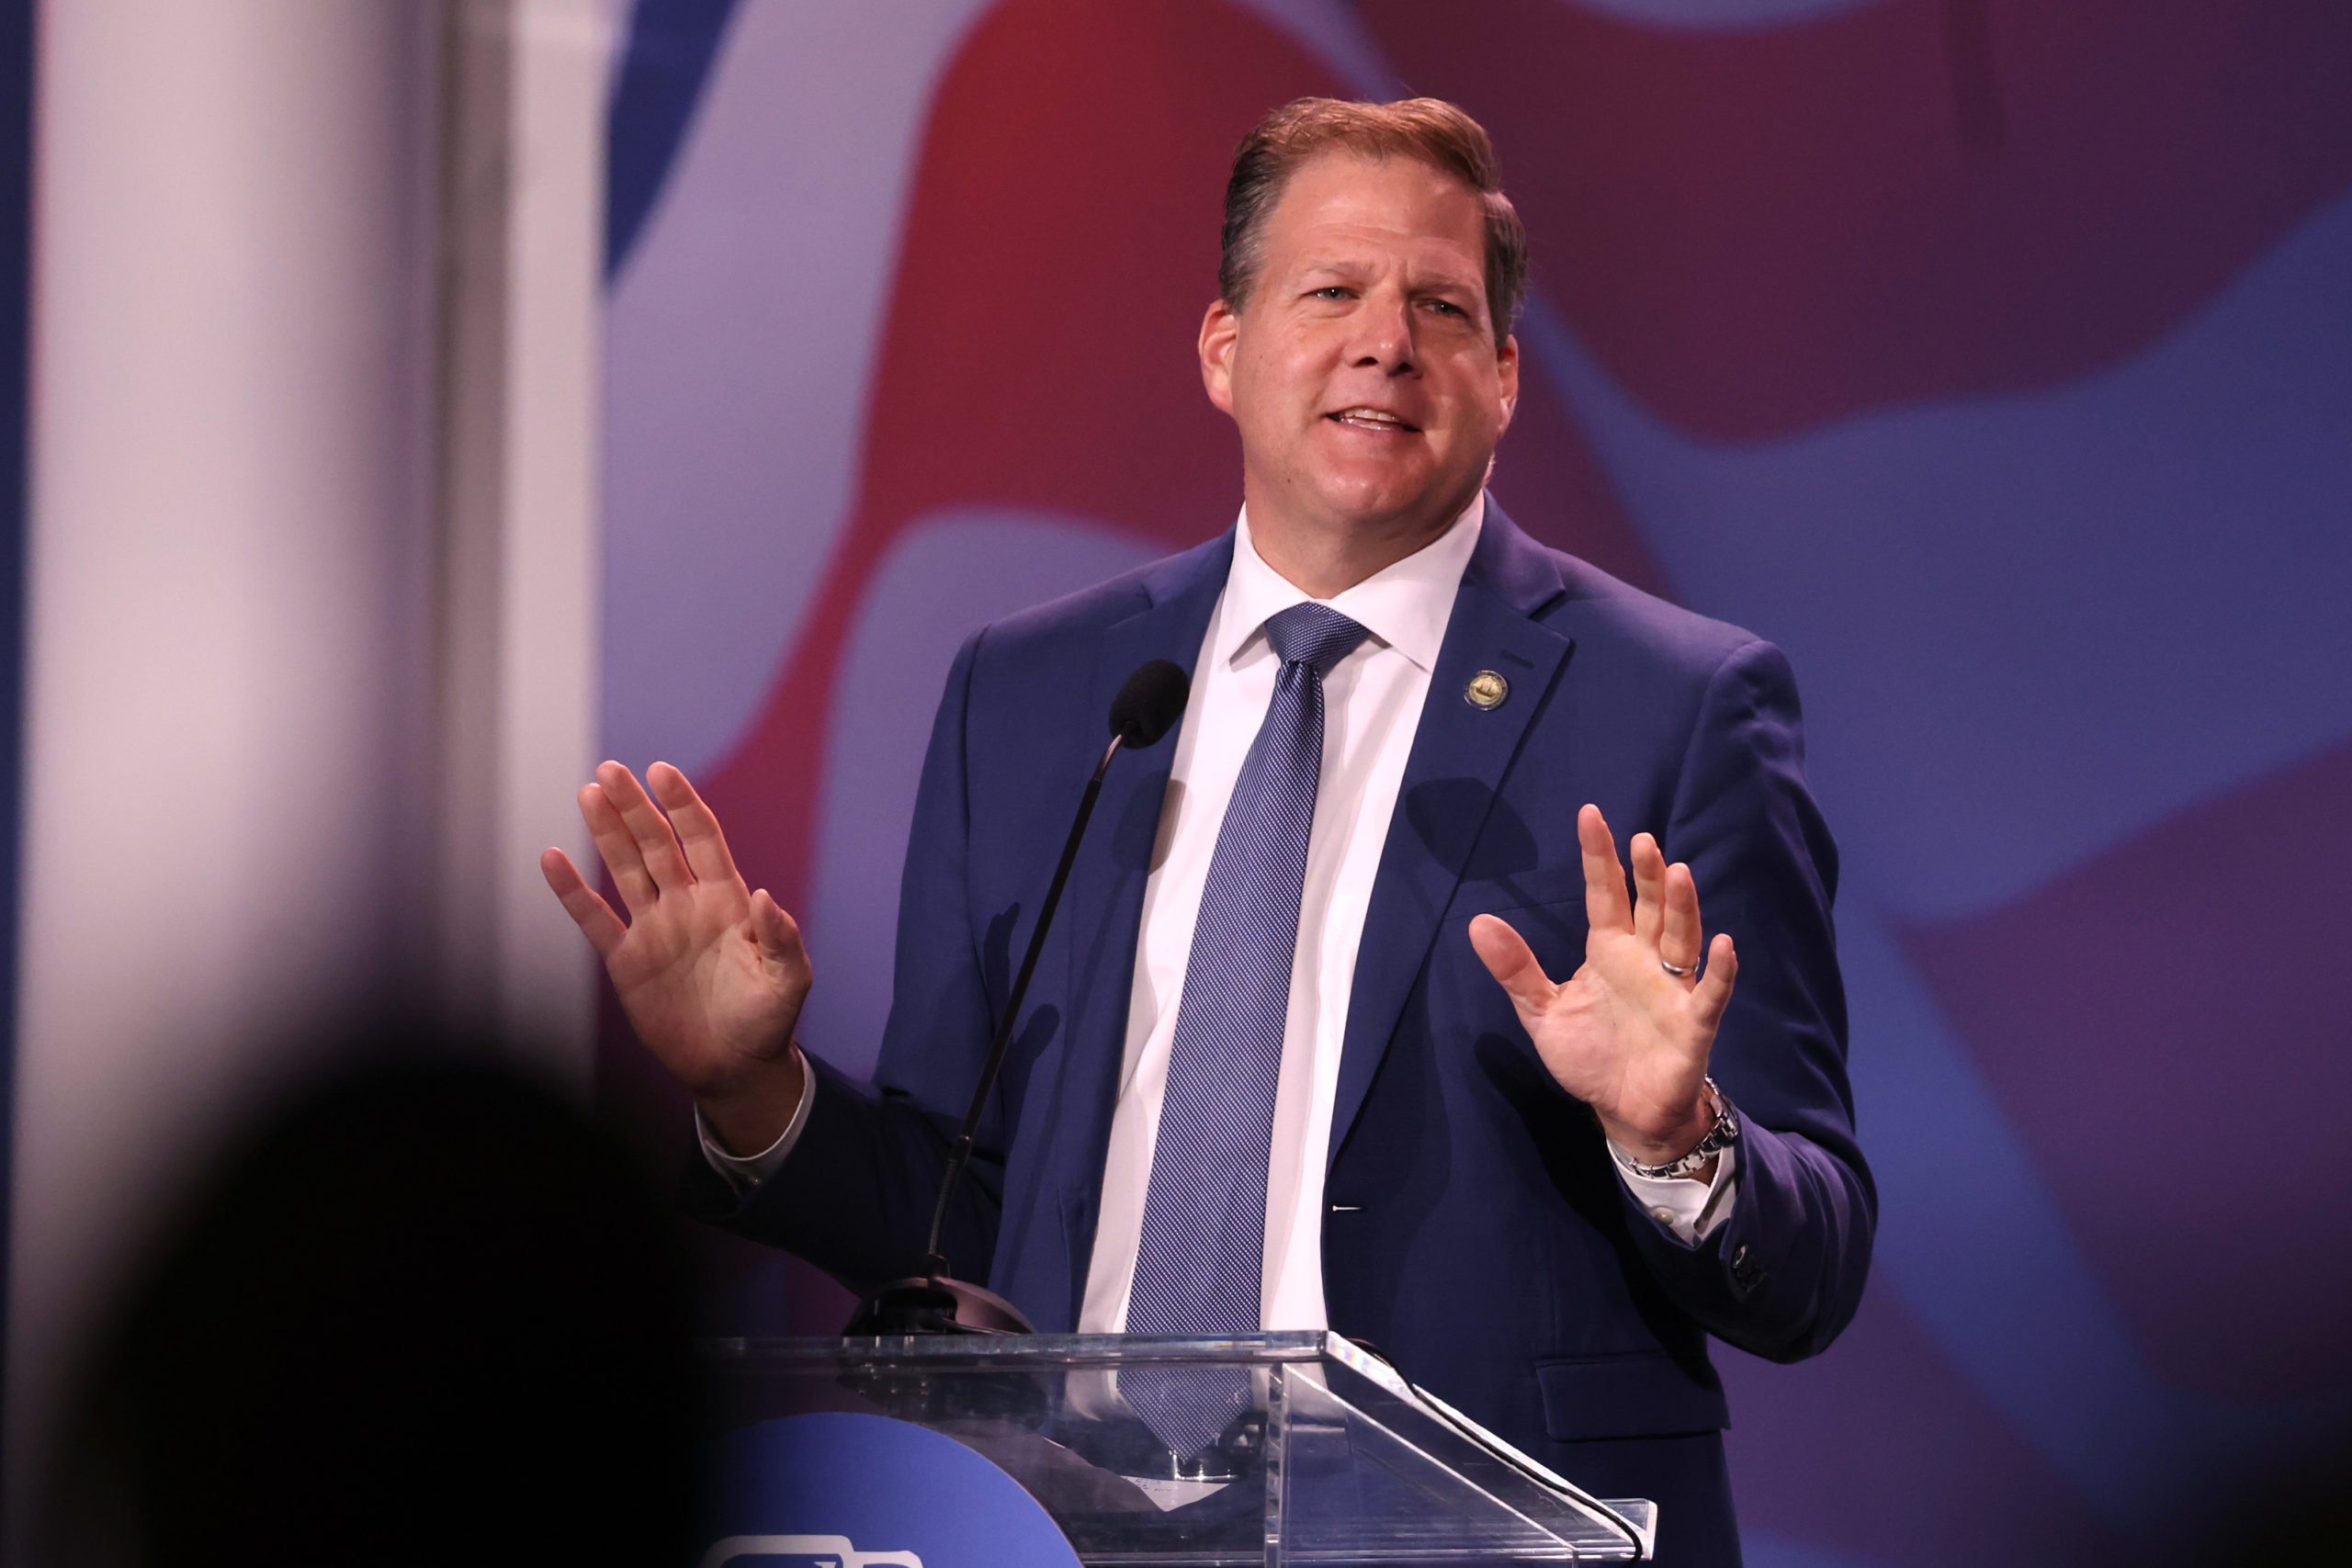 New Hampshire Gov. Chris Sununu speaks at the Republican Jewish Coalition annual leadership meeting on November 19, 2022 in Las Vegas, Nevada. (Photo by Scott Olson/Getty Images)